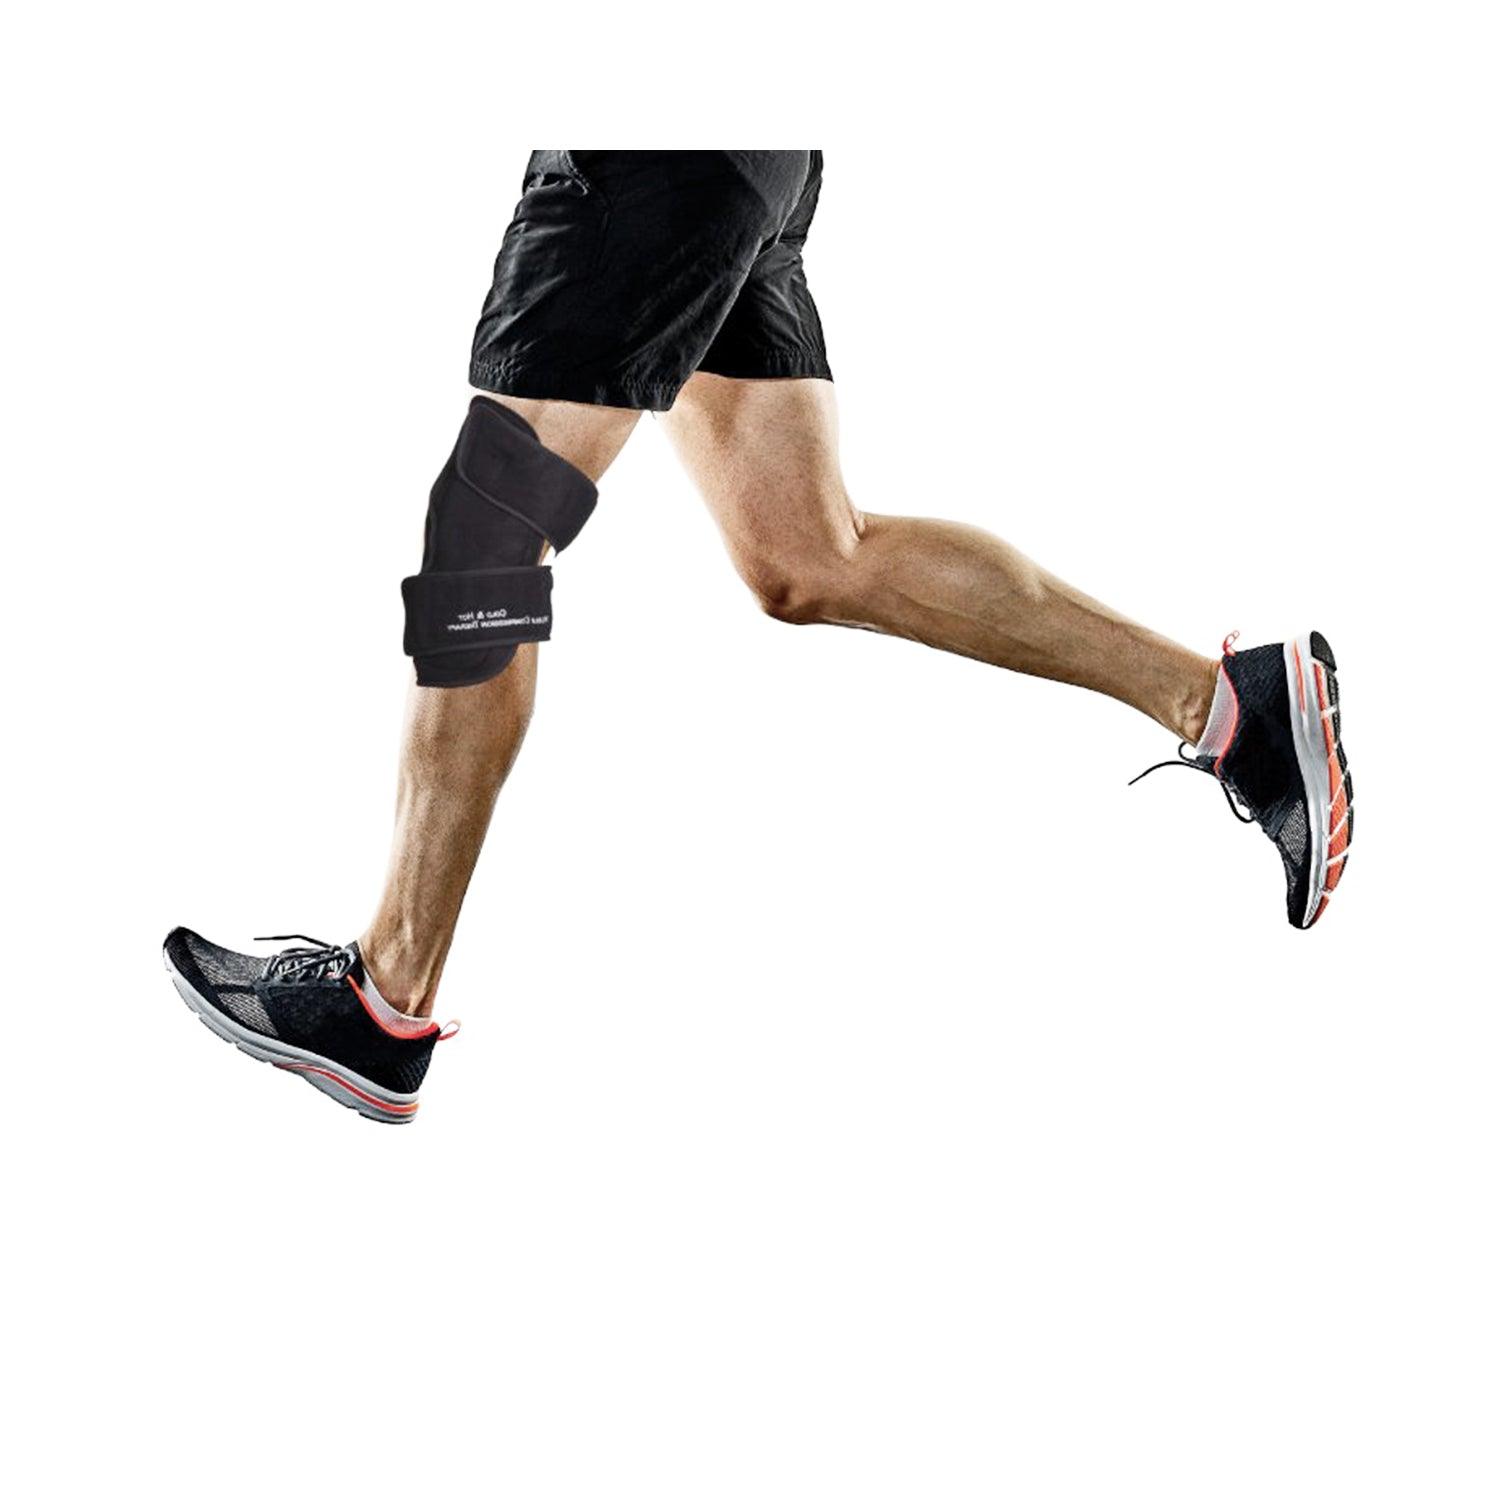 Hot/Cold & Compression Knee Support | NatraCure